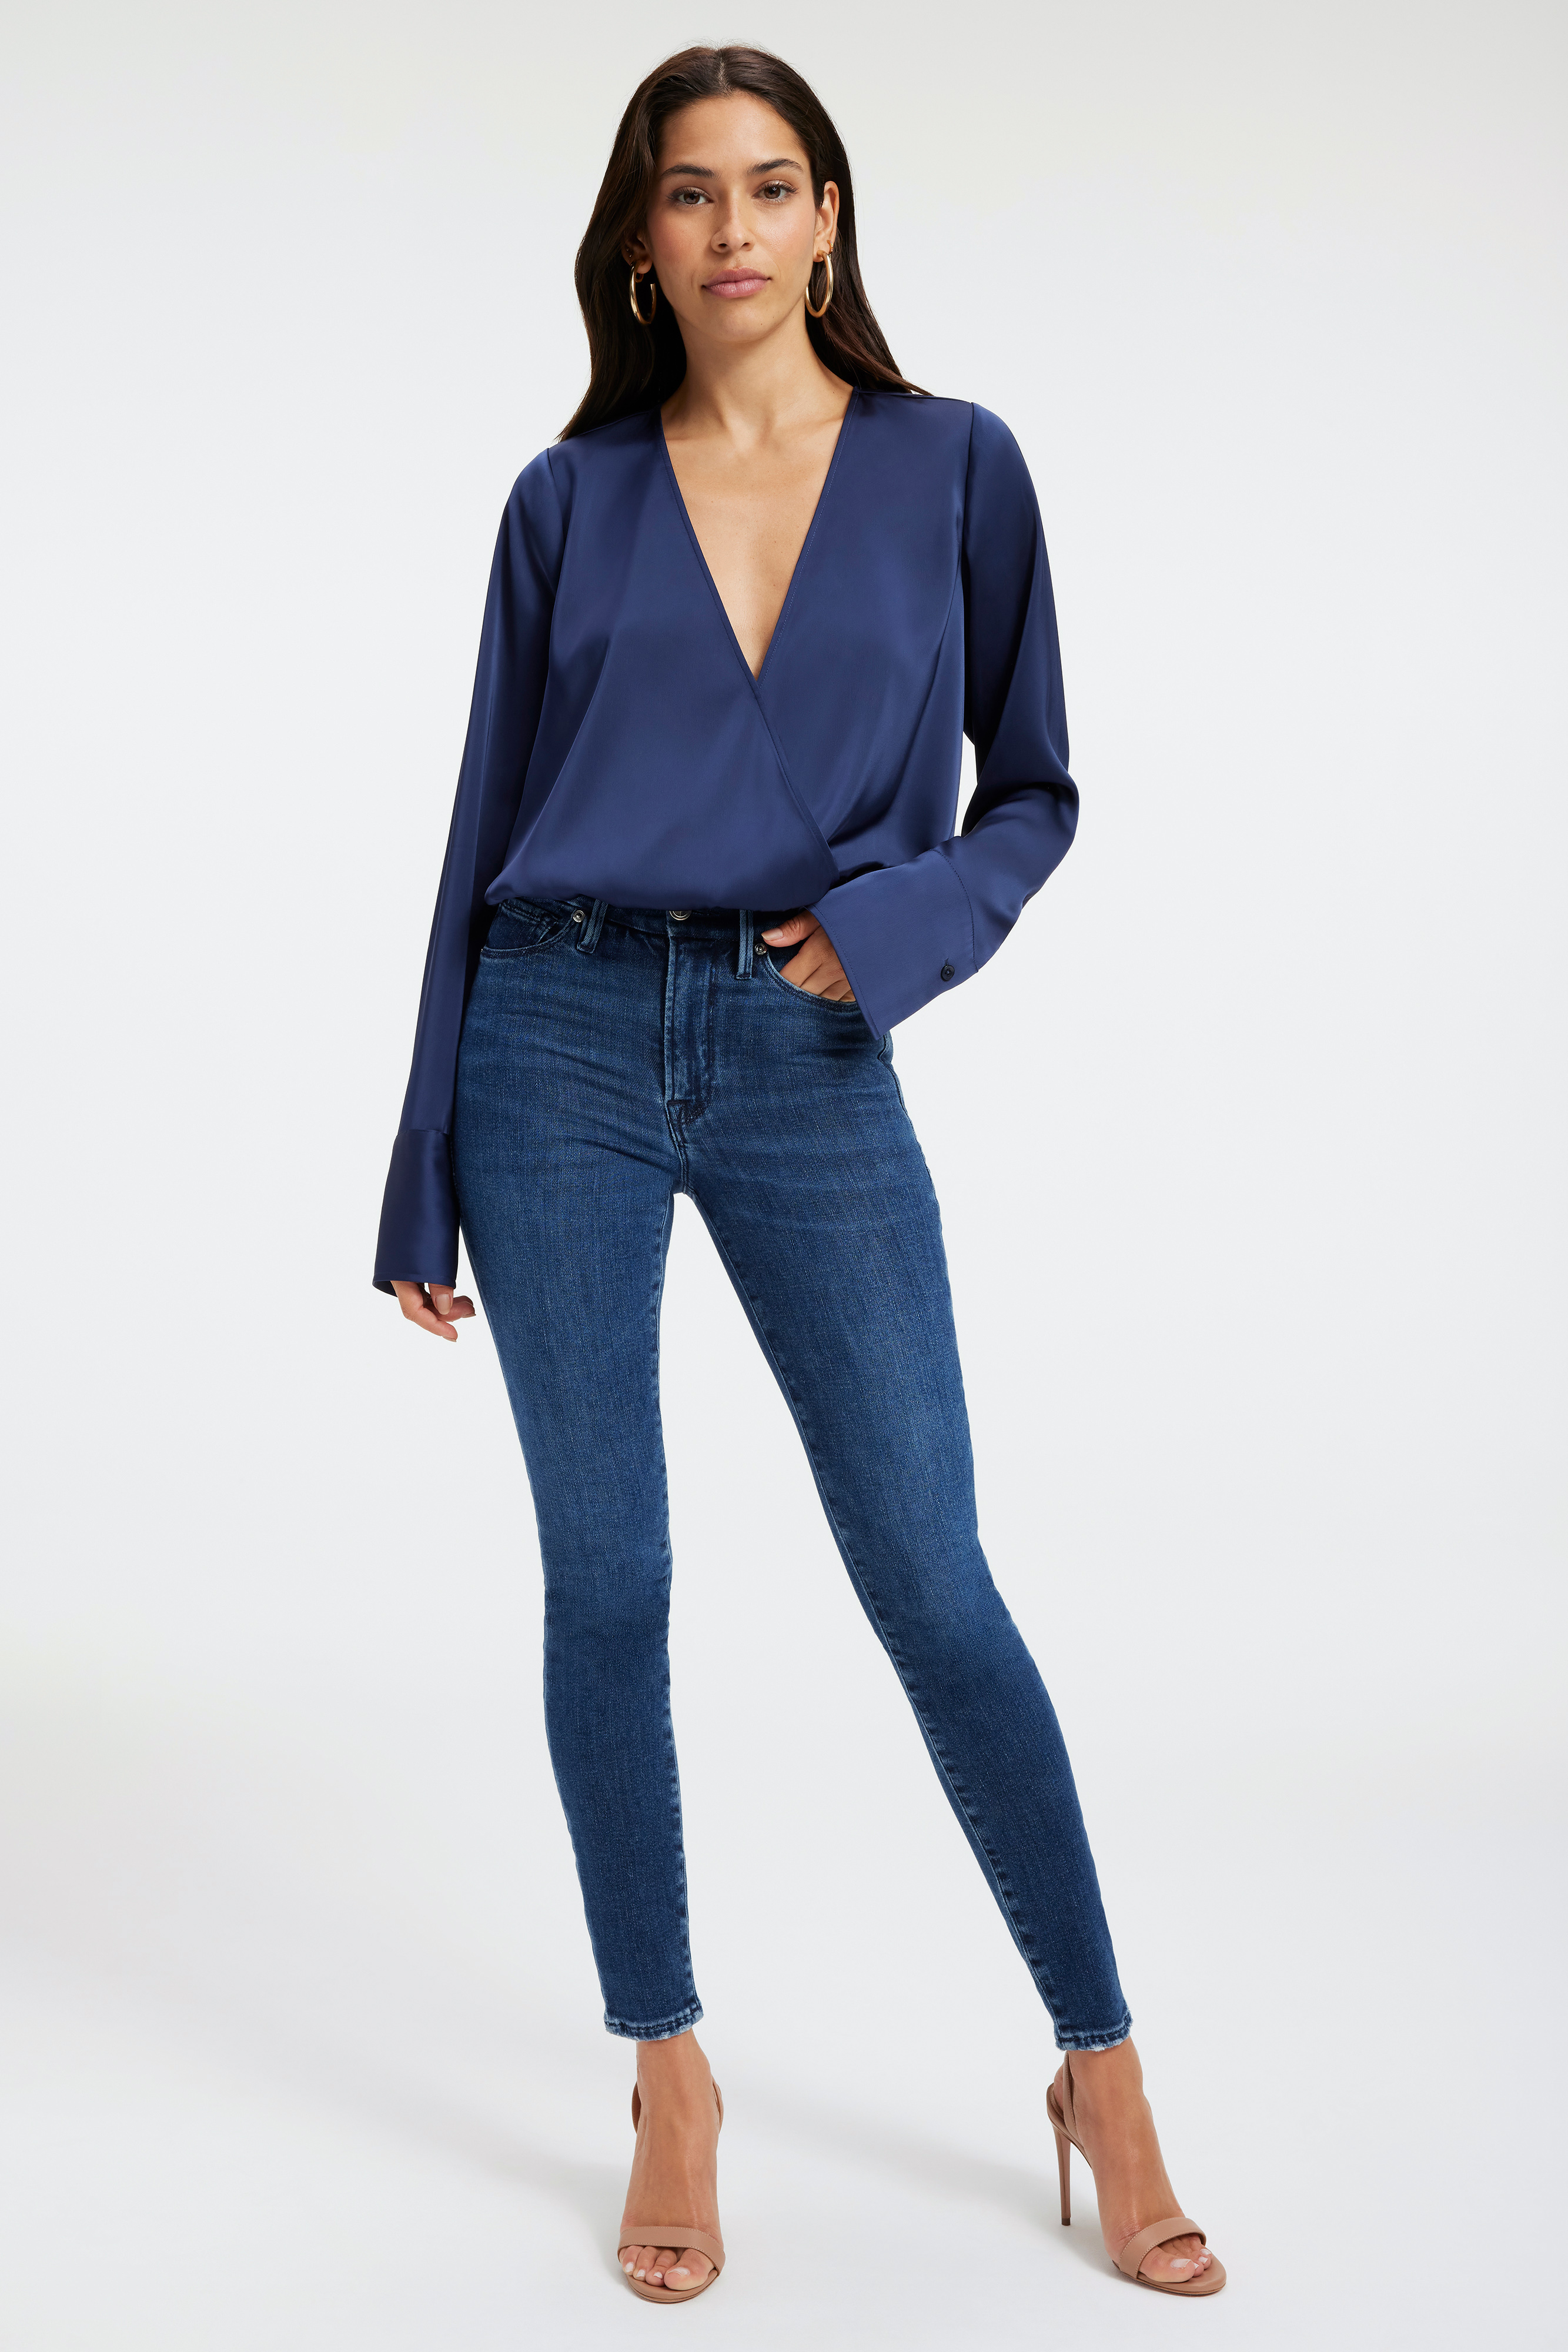 Styled with SATIN WRAP TOP | BLUE RINSE